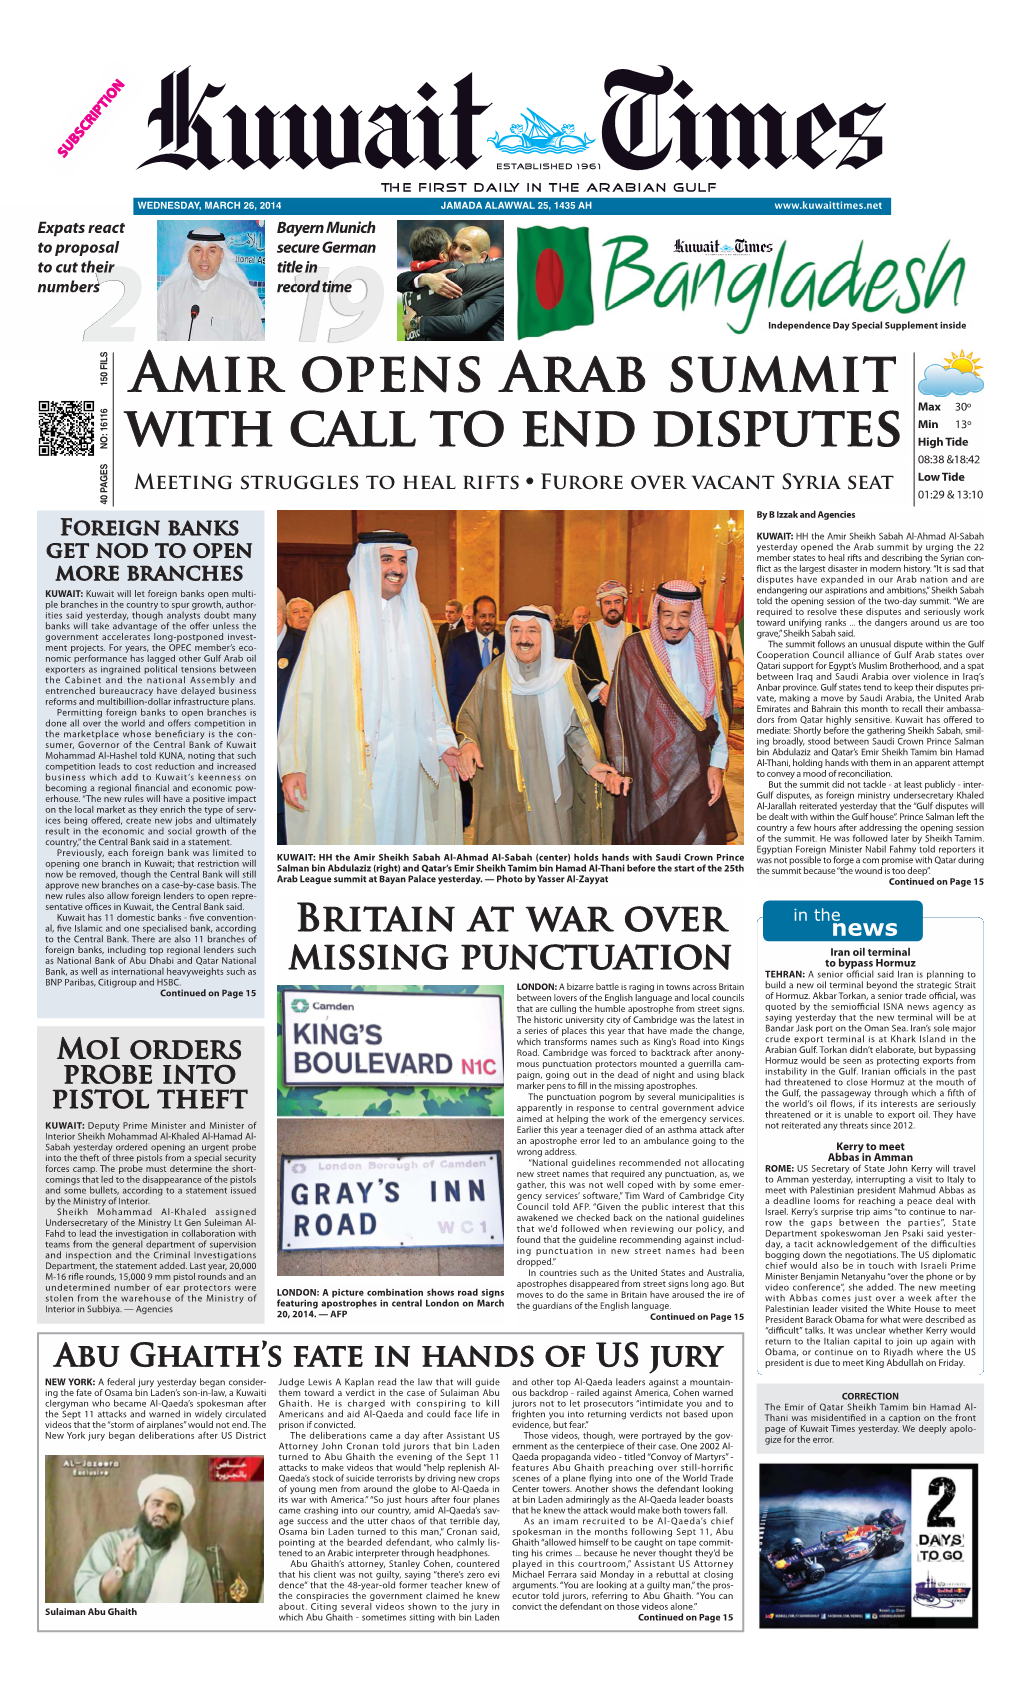 AMIR OPENS Arab Summit with Call to End Disputes